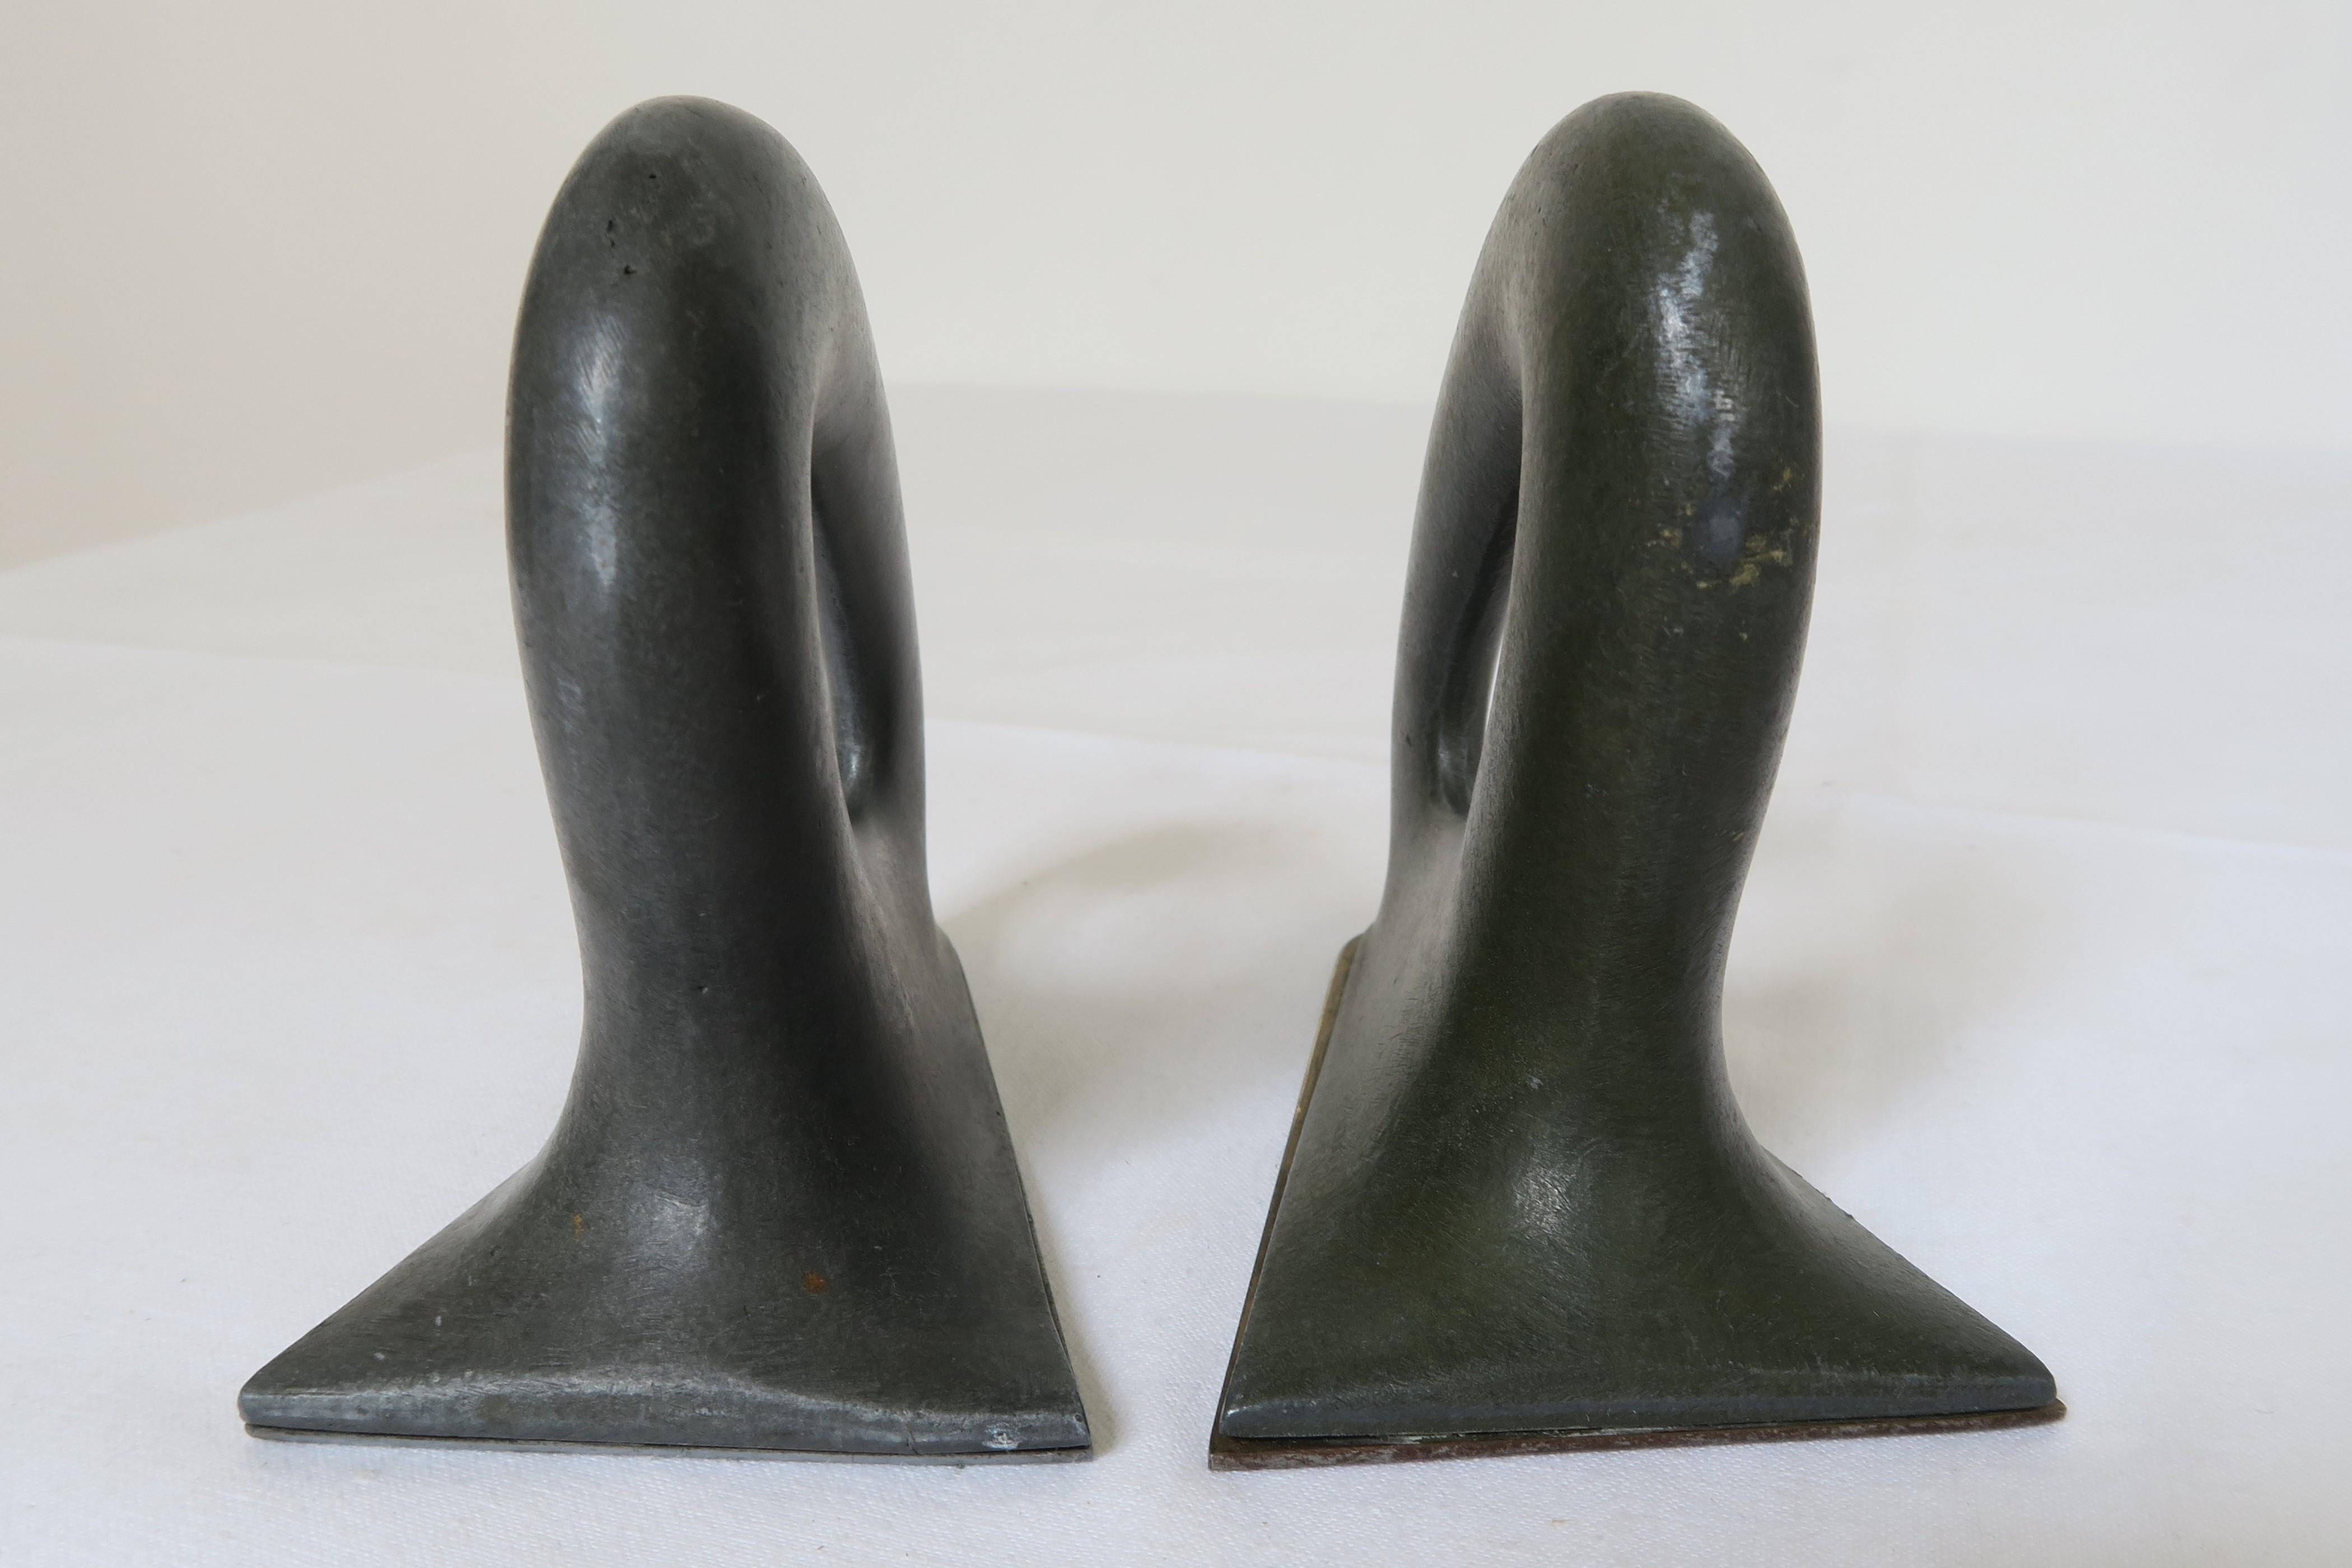 Vintage, made in the very first pre-war period of the existance of the werkstatte Aubock in Vienna.
Model number: 3531 - Illustrated in the exhibition catalogue of the Vienna Historical Museum.

For sale are a pair of super rare bookends. Auböck